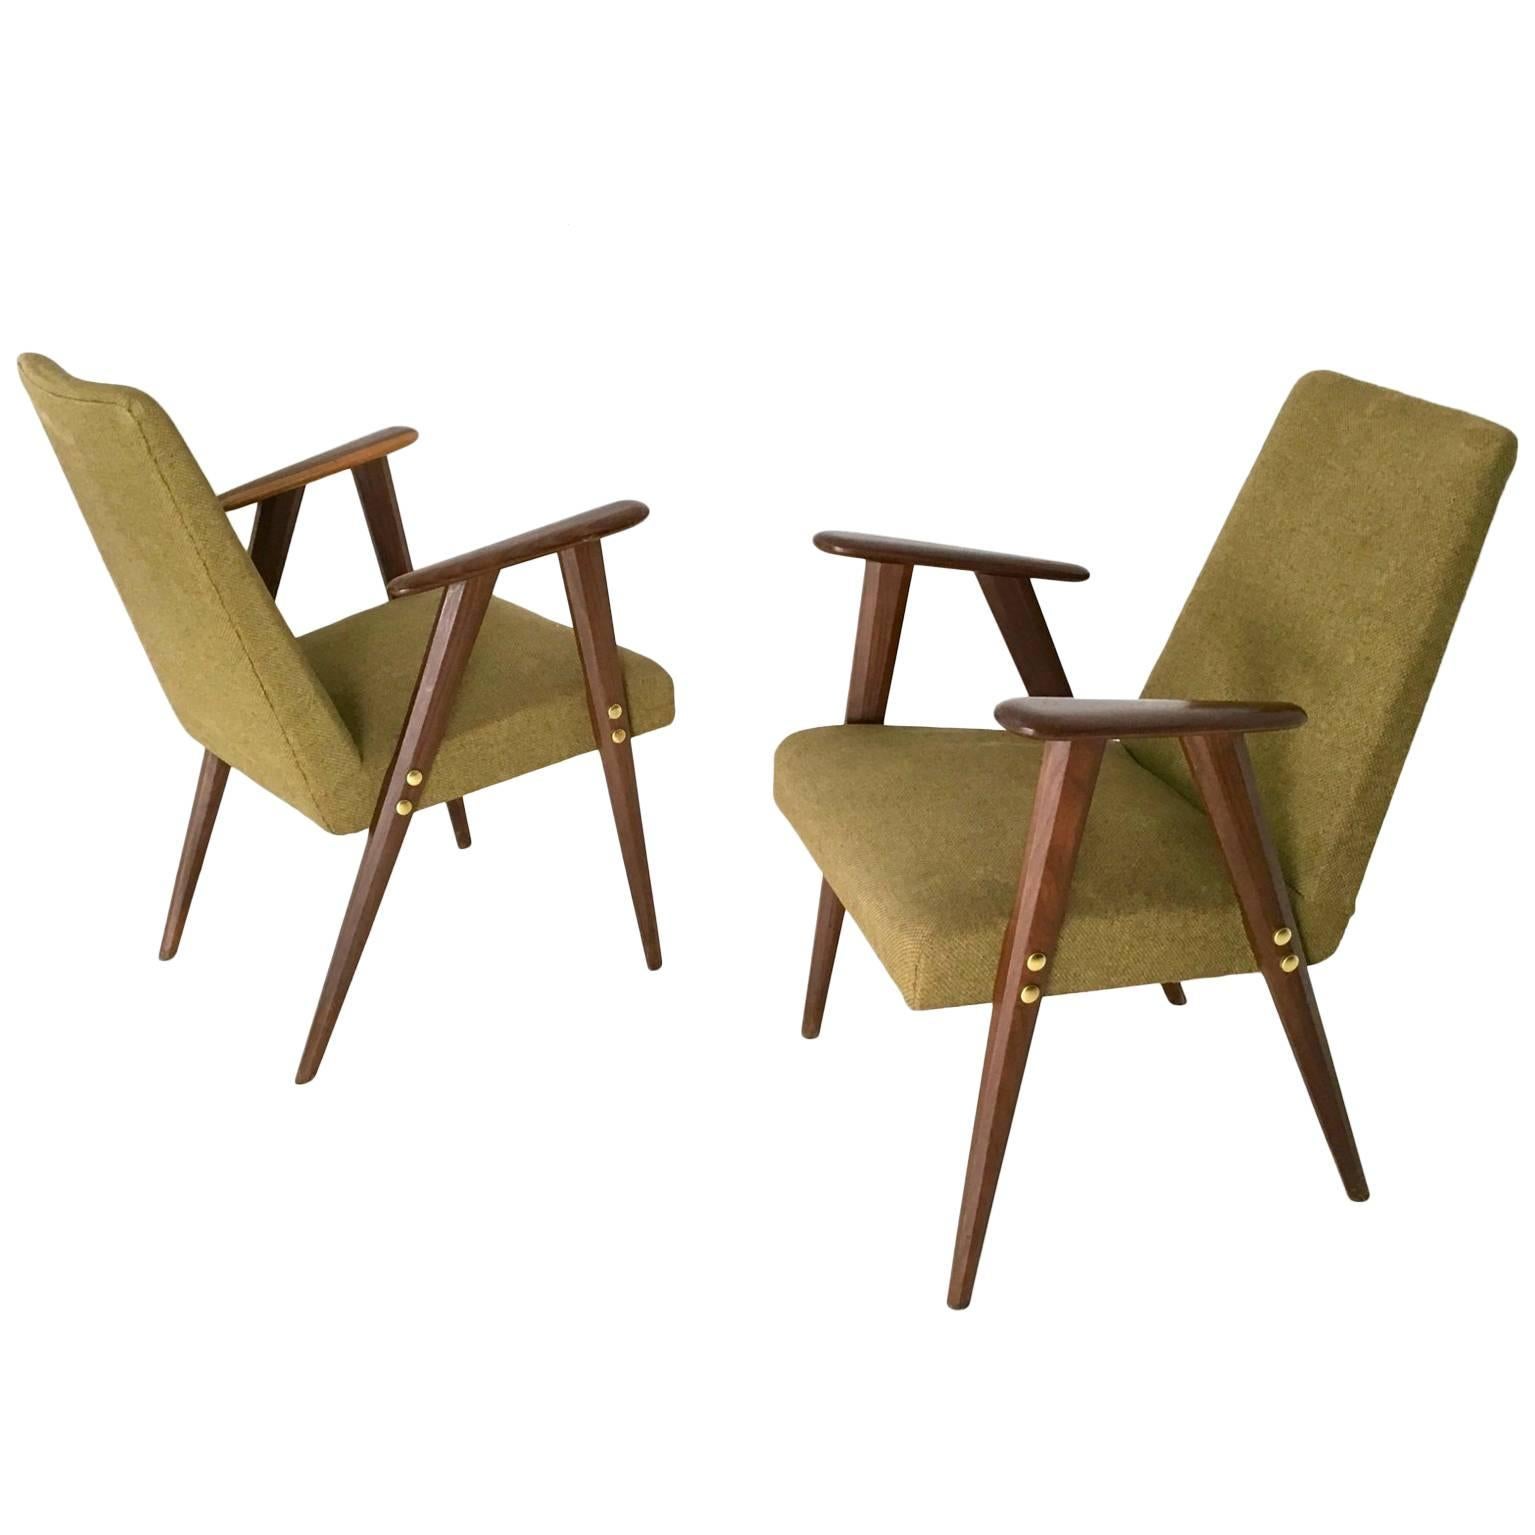 Pair of Fabric and Wood Armchairs, Italy, 1950s